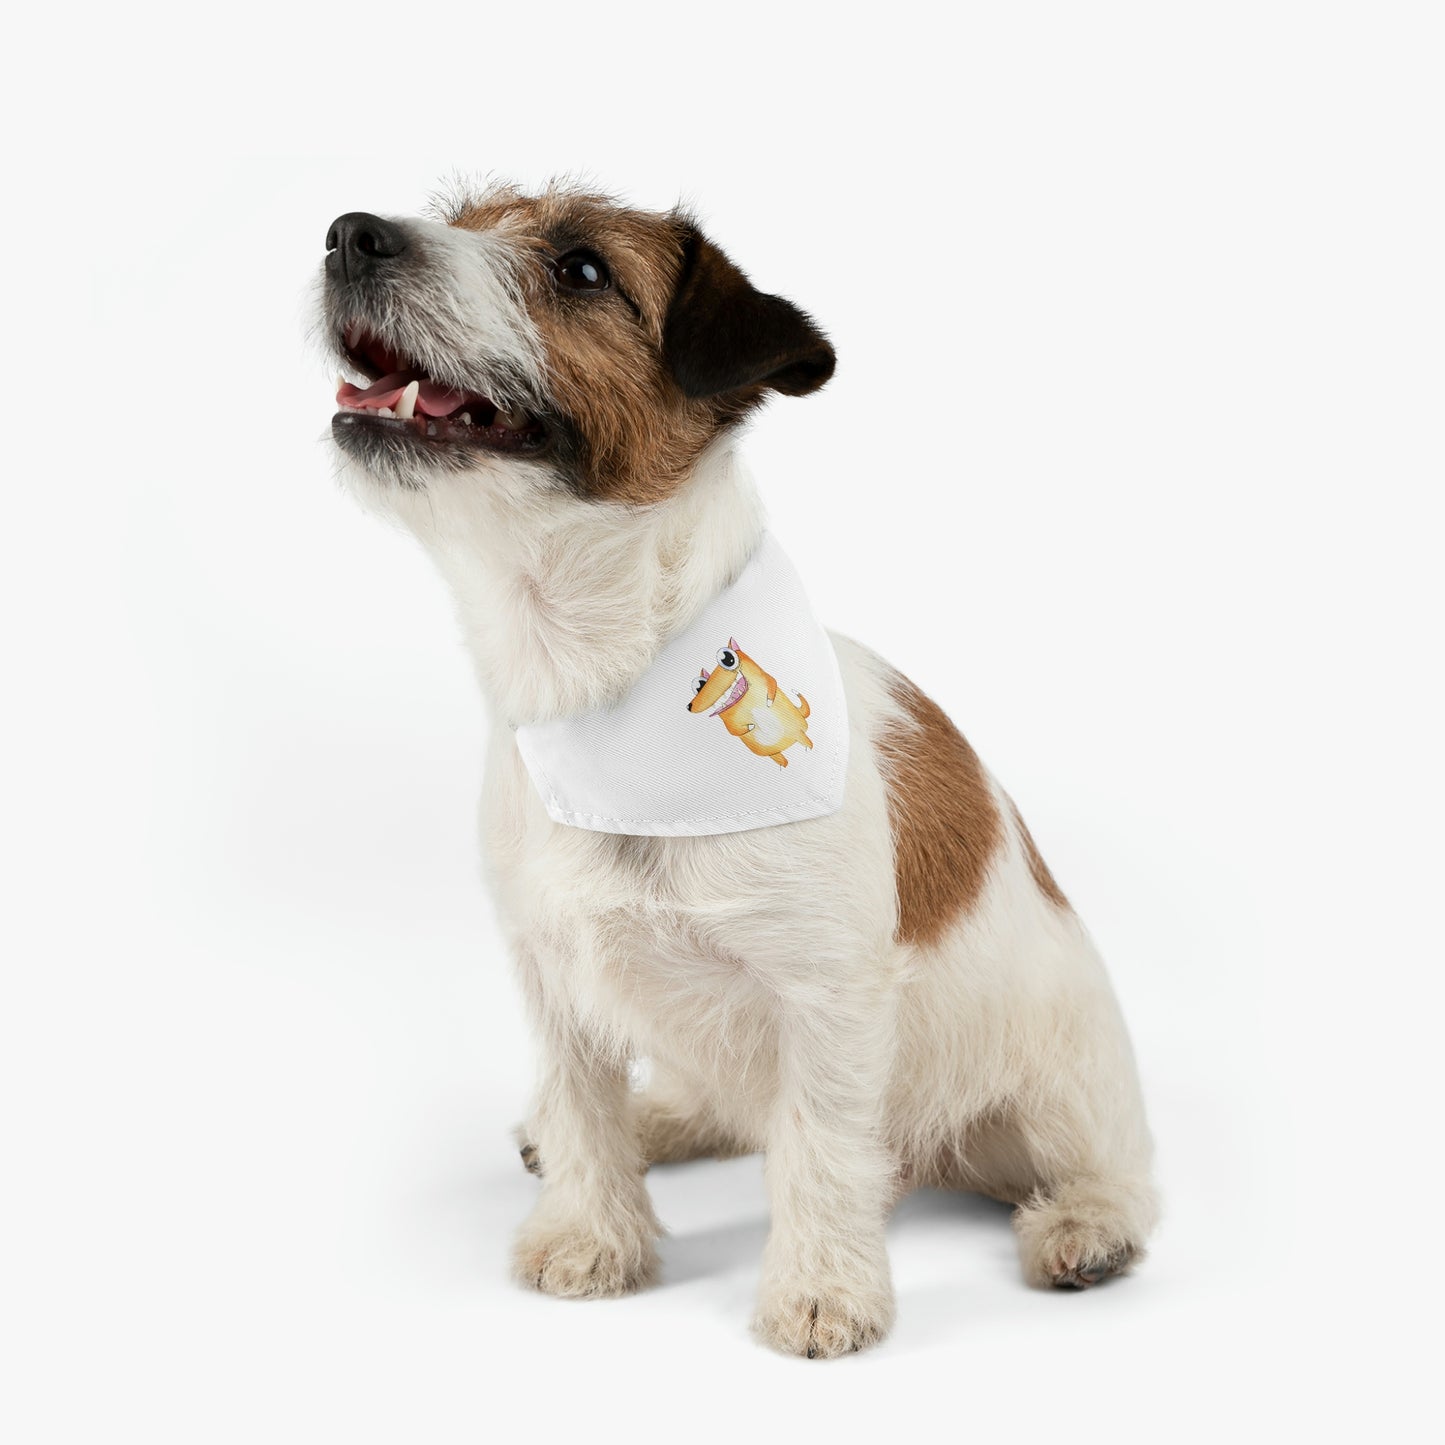 "Funny Dog" Pet Bandana - Weave Got Gifts - Unique Gifts You Won’t Find Anywhere Else!